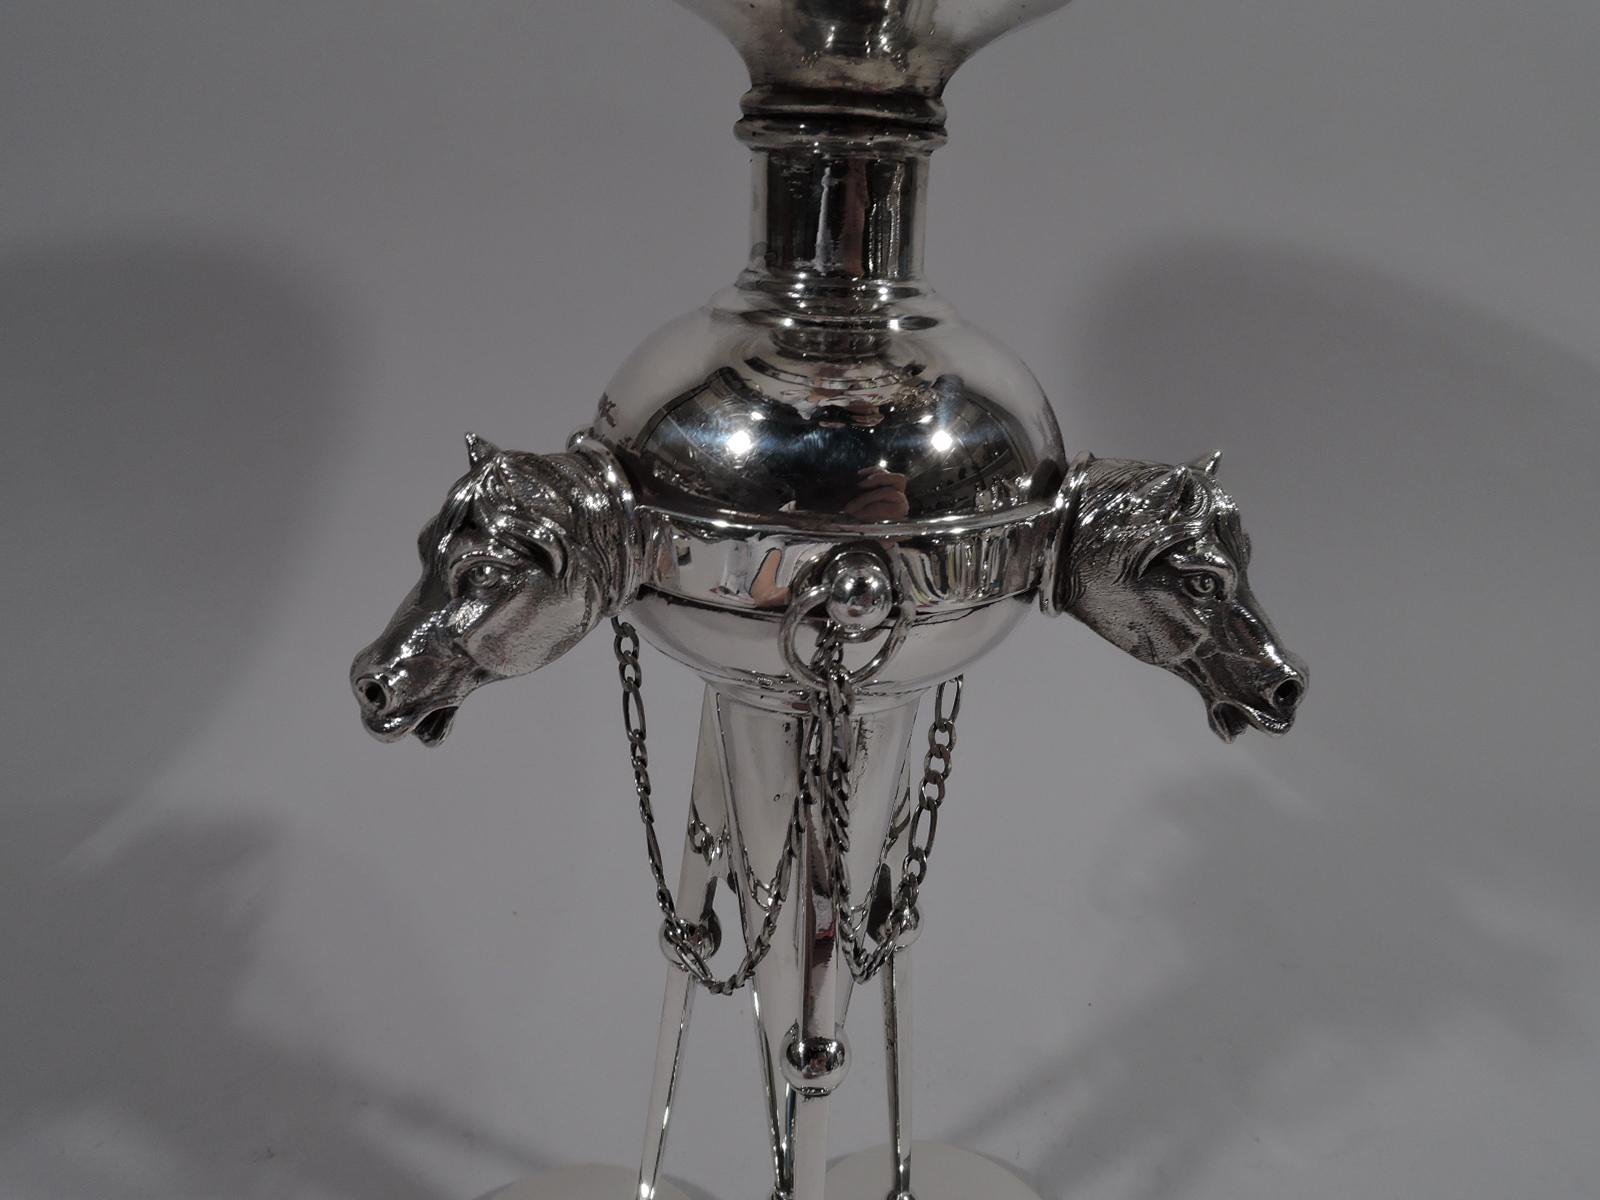 Tall and stylish avant-garde sterling silver horse compote, circa 1870. Round bowl with beaded rim on short support mounted to globe with pendant cone. Tripod support with stylized hoof-and-scroll feet mounted to trefoil foot with stylized